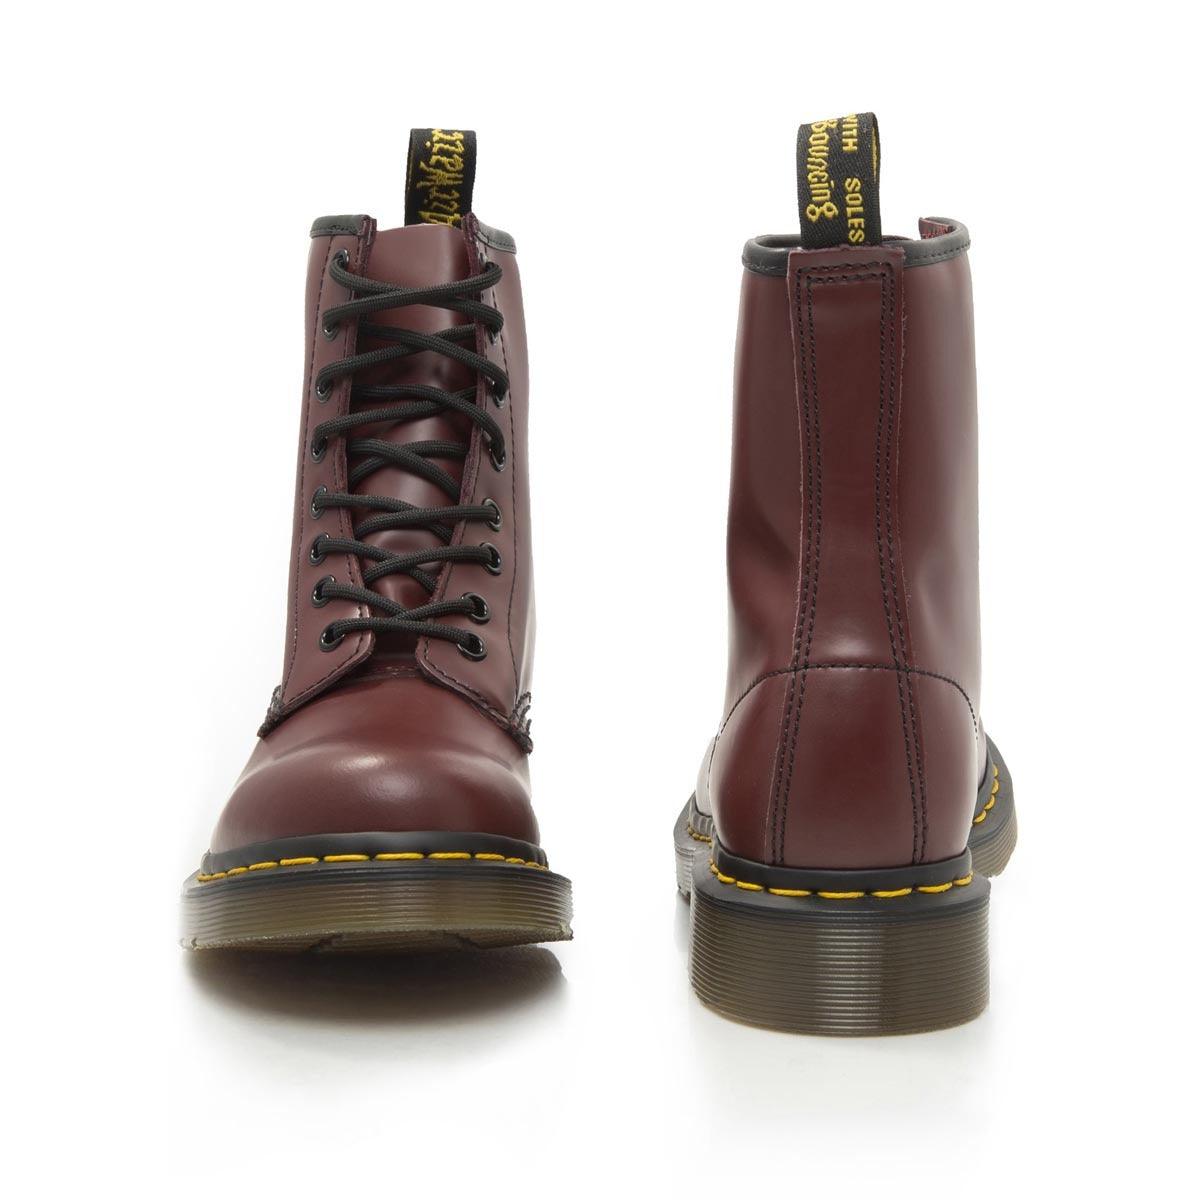 Shop Dr Martens Unisex 1460 Smooth Boots | Cherry Red - The Next Pair